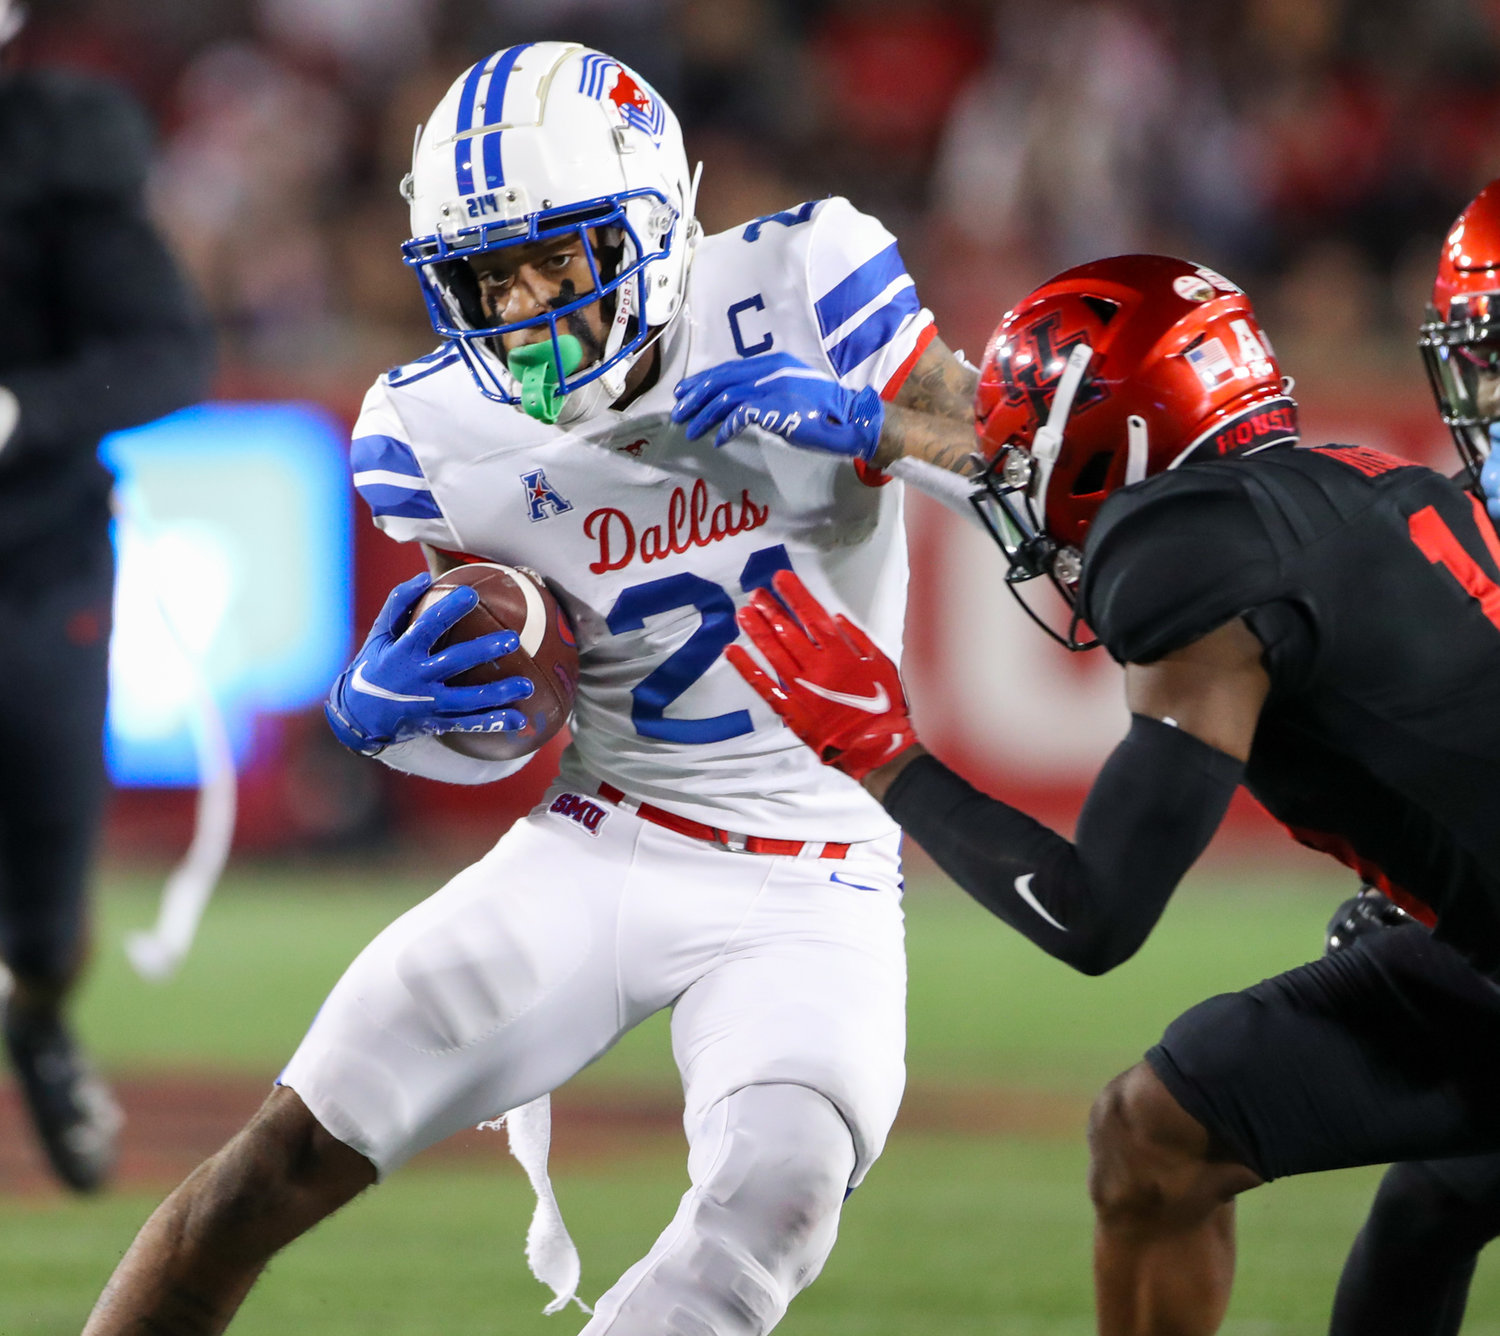 SMU Mustangs wide receiver Reggie Roberson Jr. (21) carries the ball after a reception during an NCAA football game between Houston and SMU on October 30, 2021 in Houston, Texas.